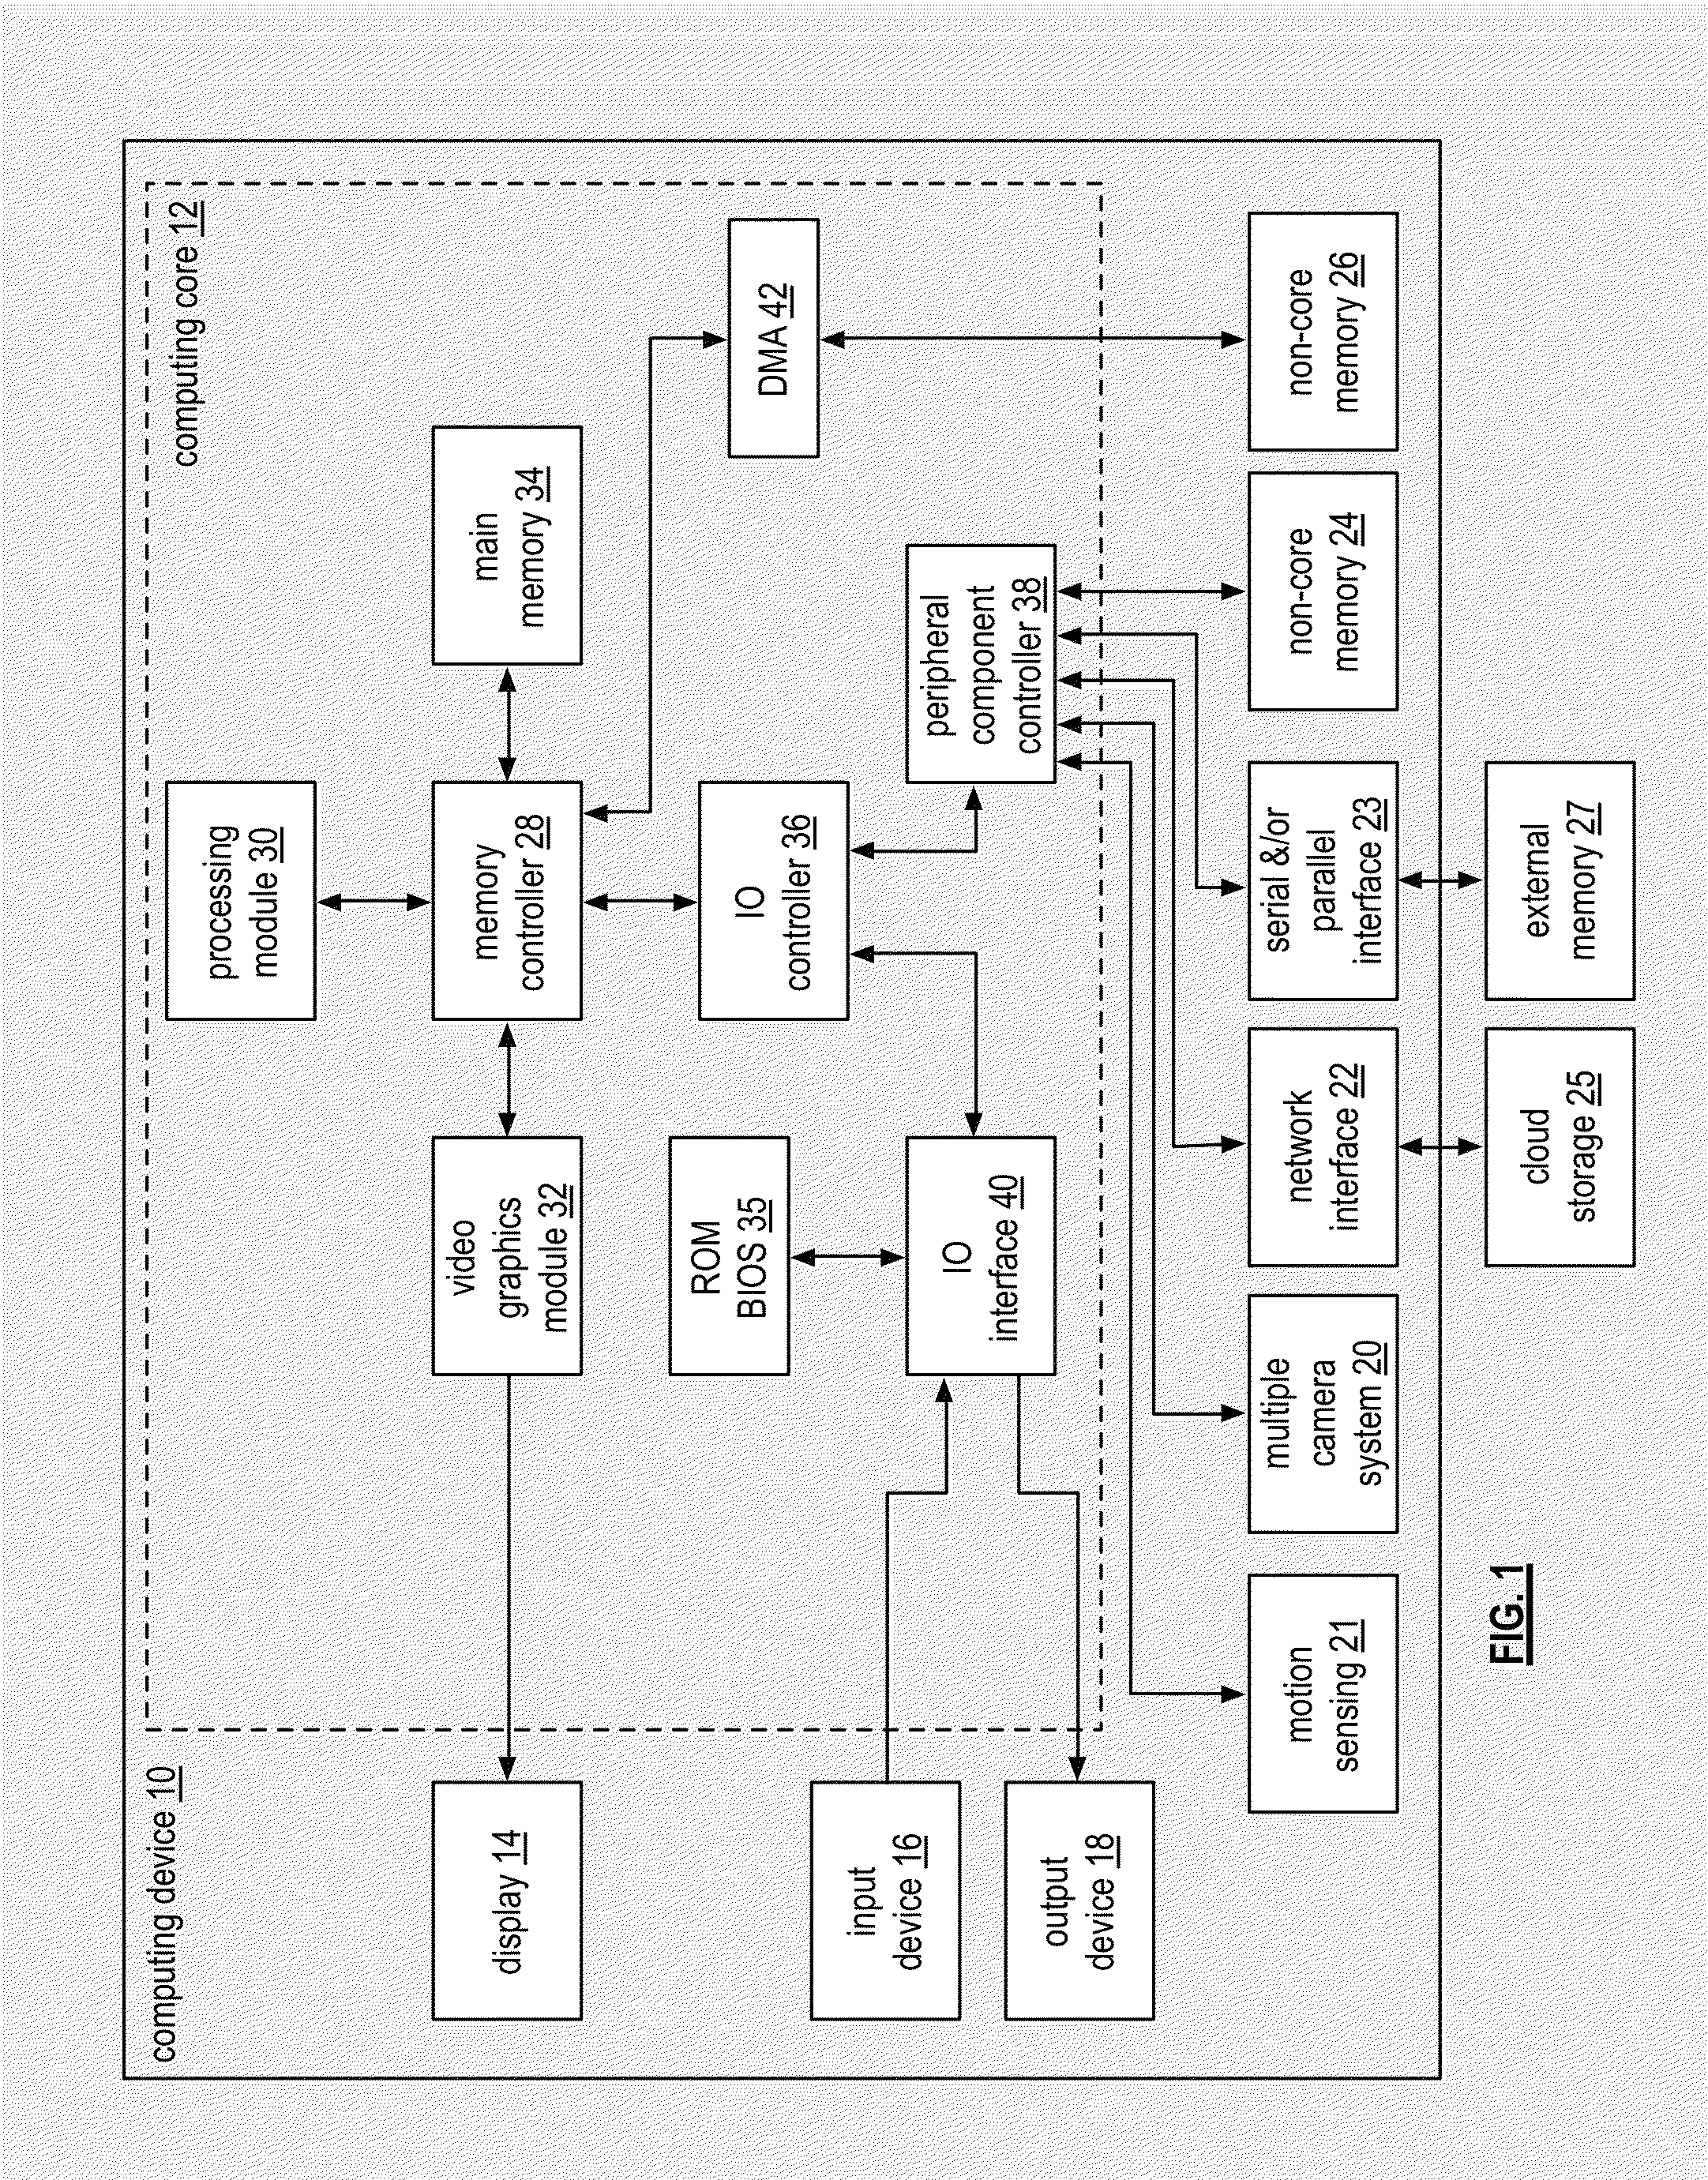 Multiple camera system with auto recalibration